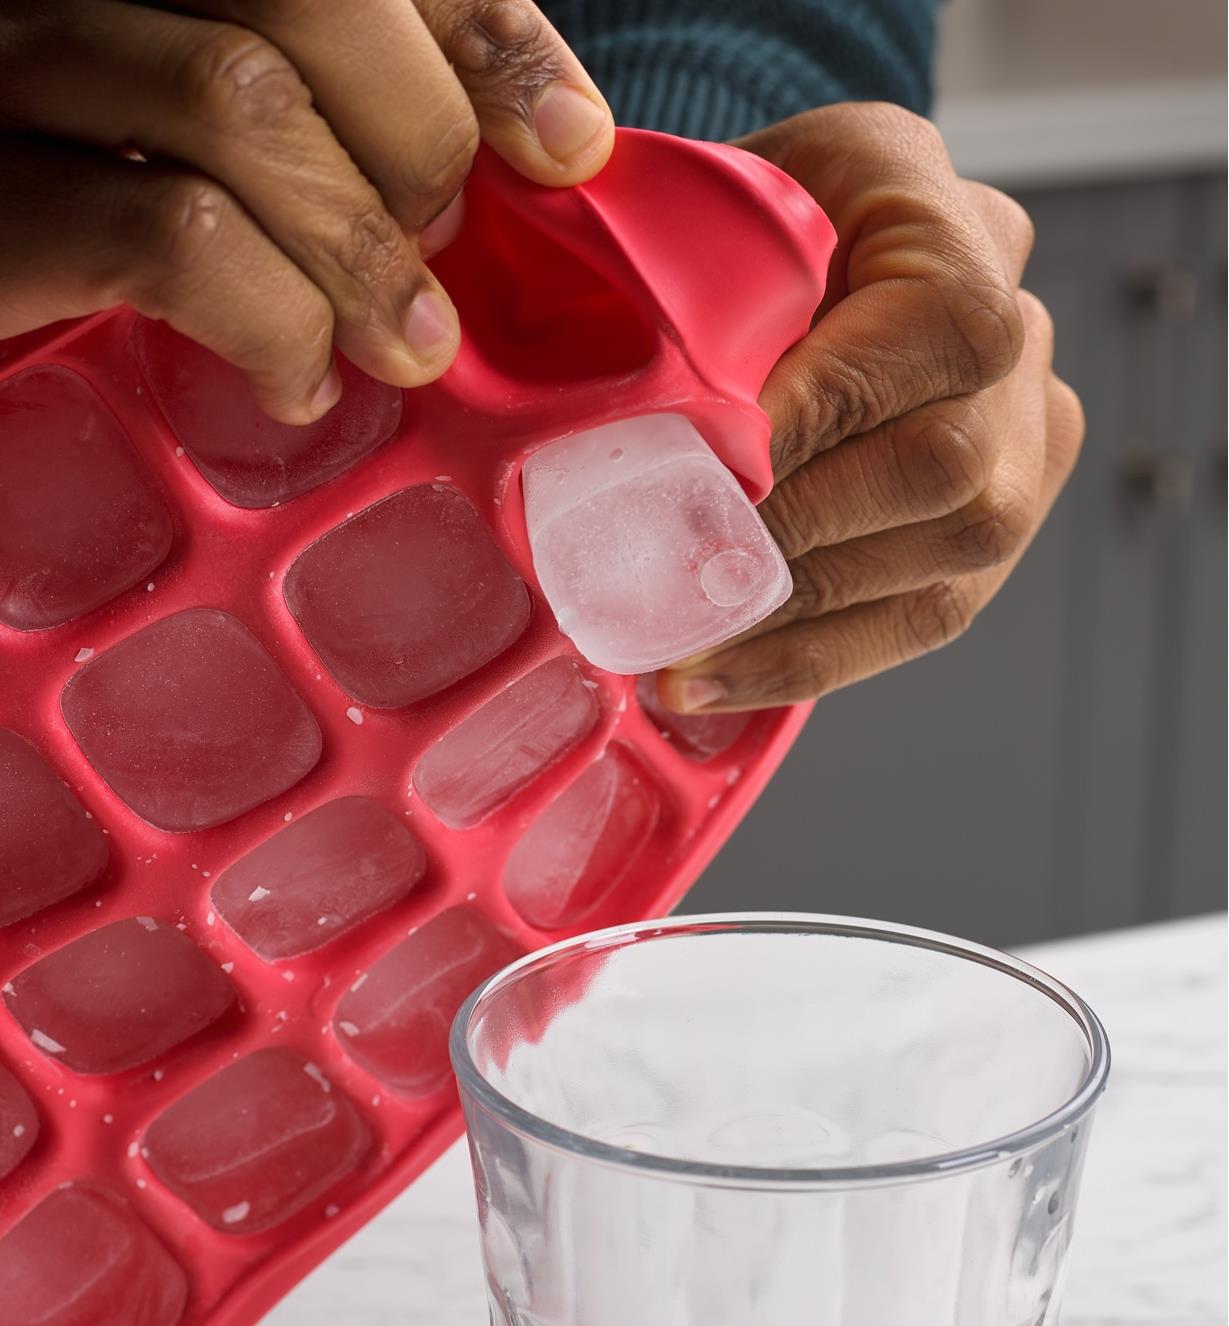 https://assets.leevalley.com/Size4/10113/EV825-extra-large-ice-cube-tray-u-0178.jpg